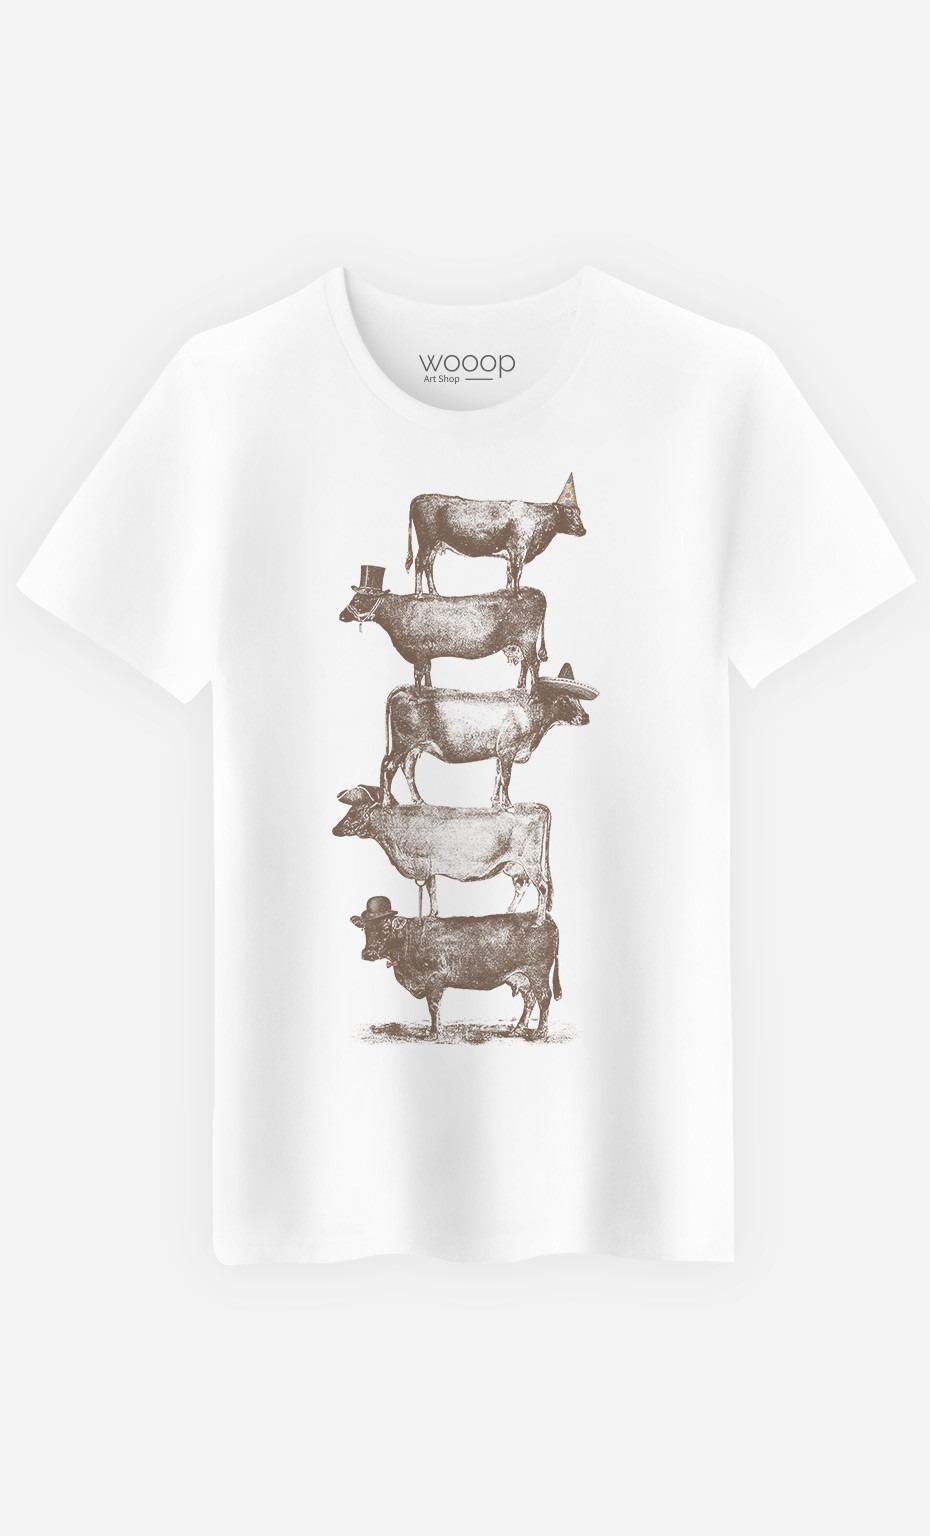 T-Shirt Cow Cow Nuts